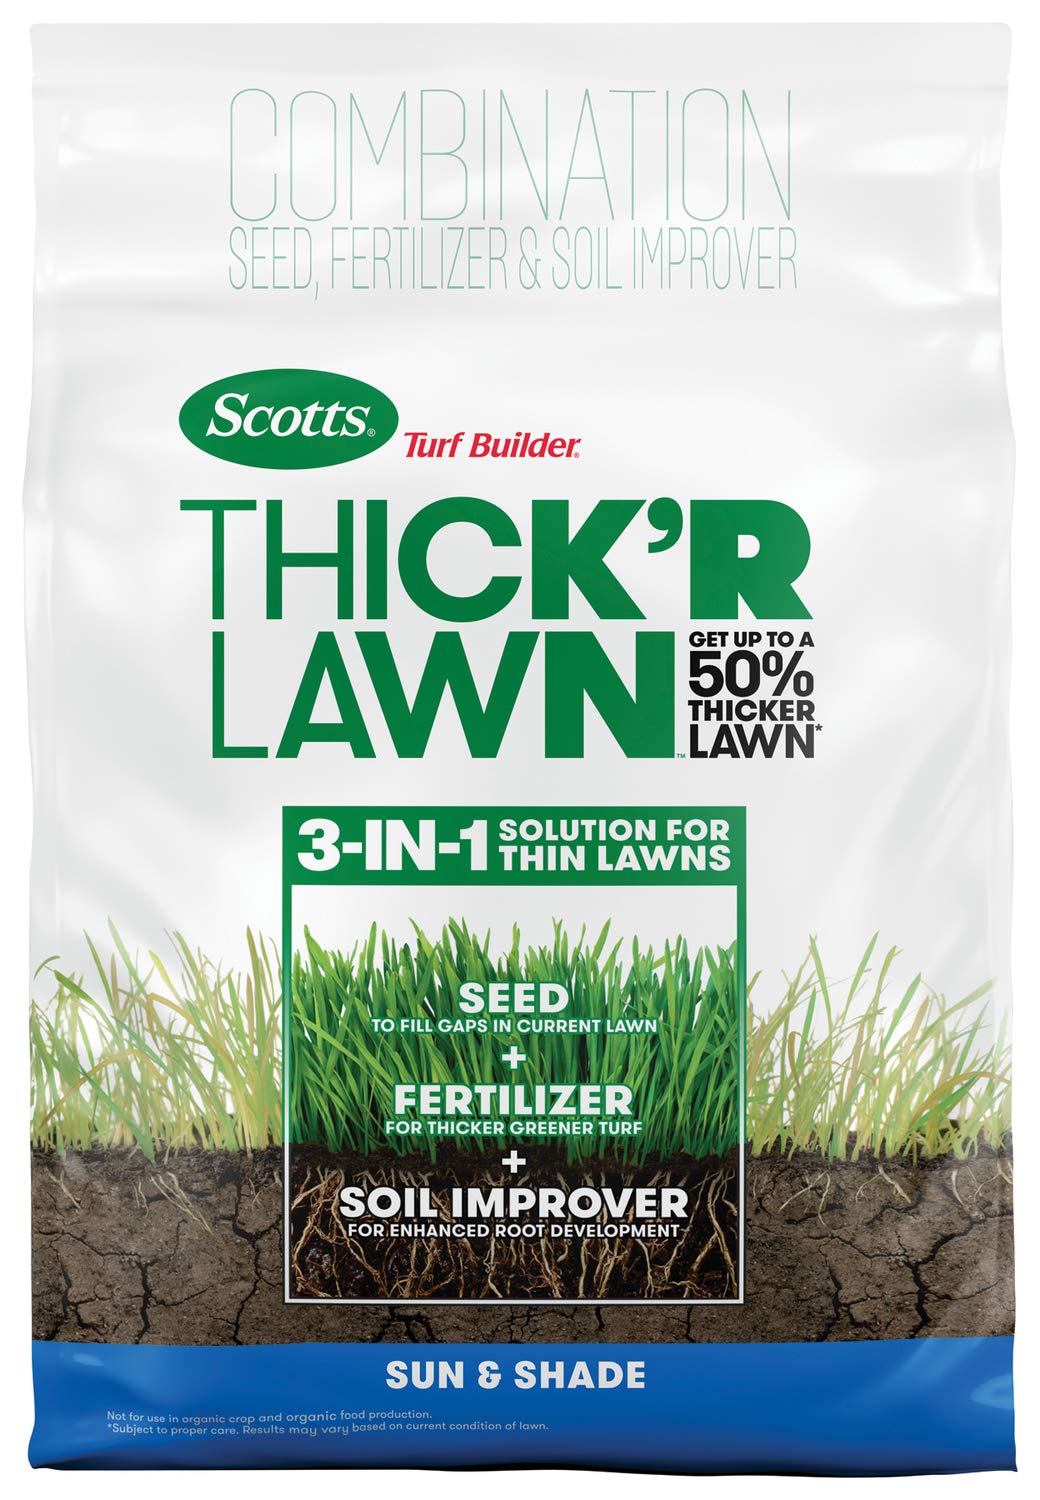 Scotts Turf Builder THICK'R LAWN Grass Seed, Fertilizer, and Soil Improver